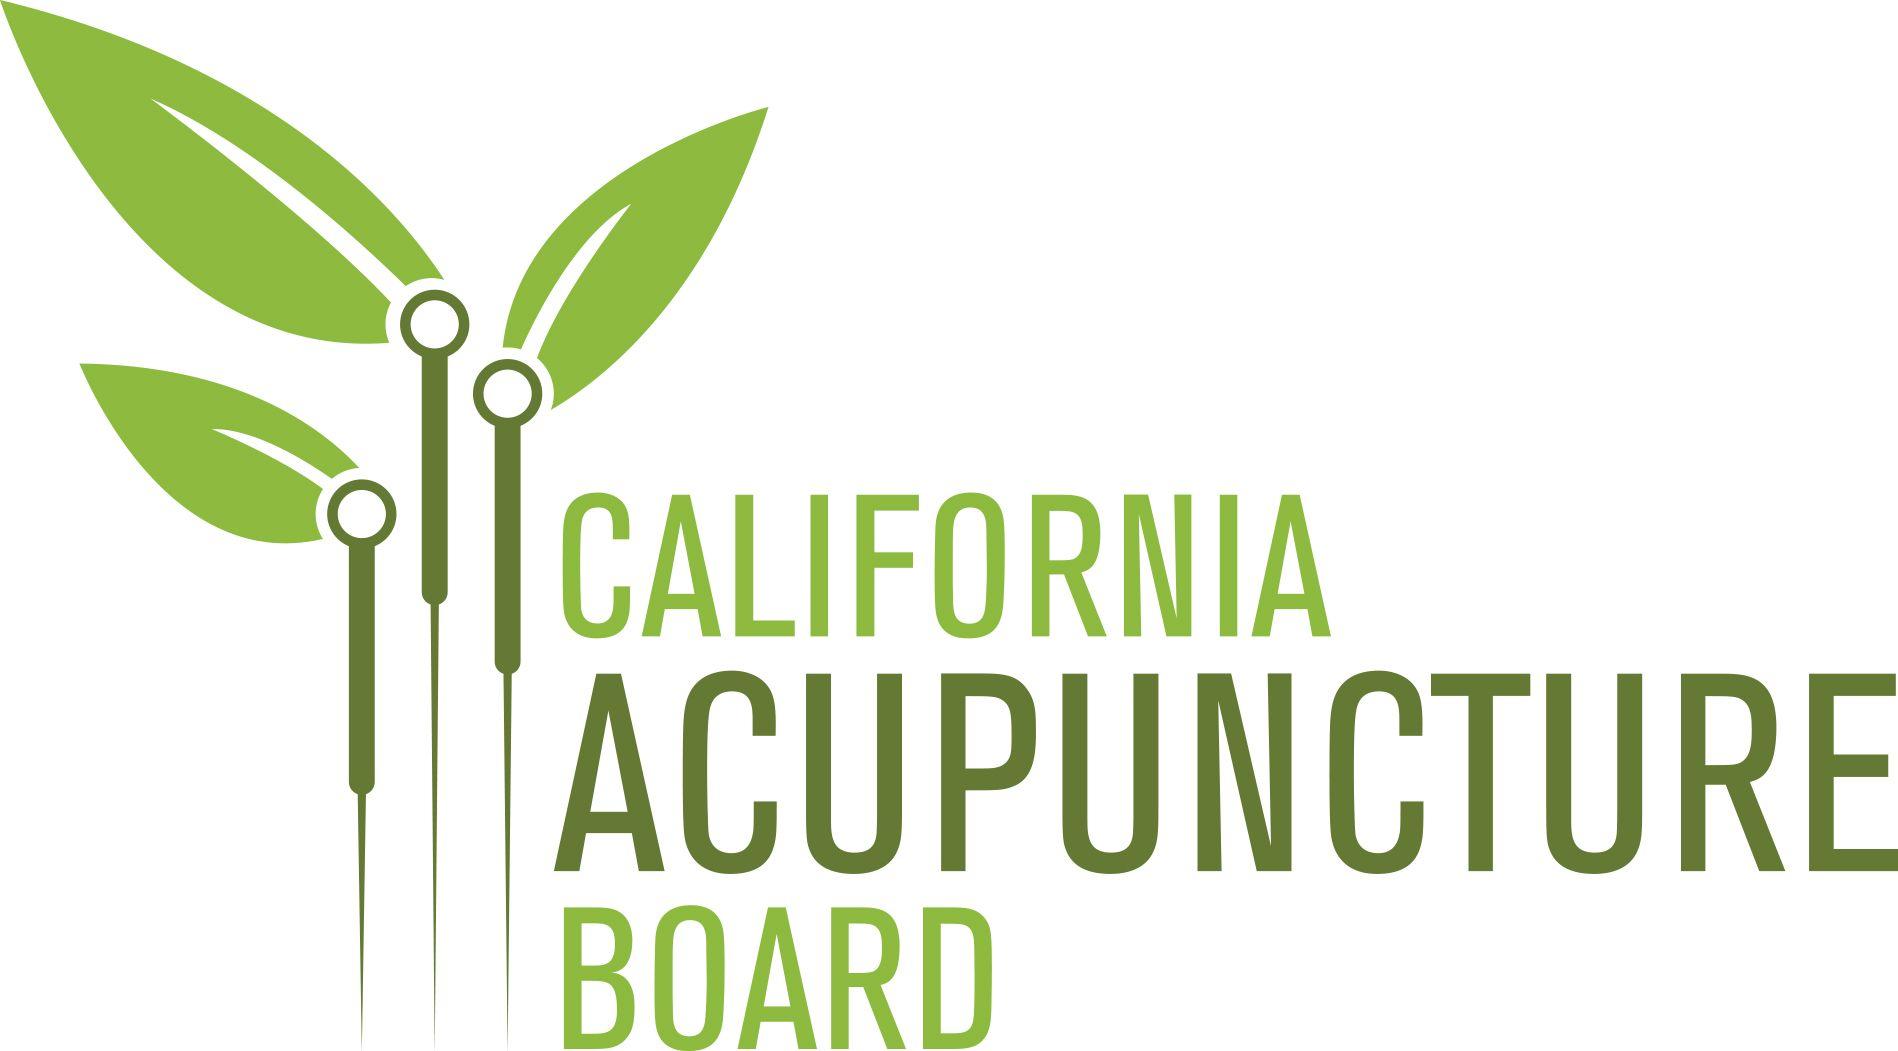 Acupuncture Logo - New Acupuncture Board Logo is on Point – The DCA Page